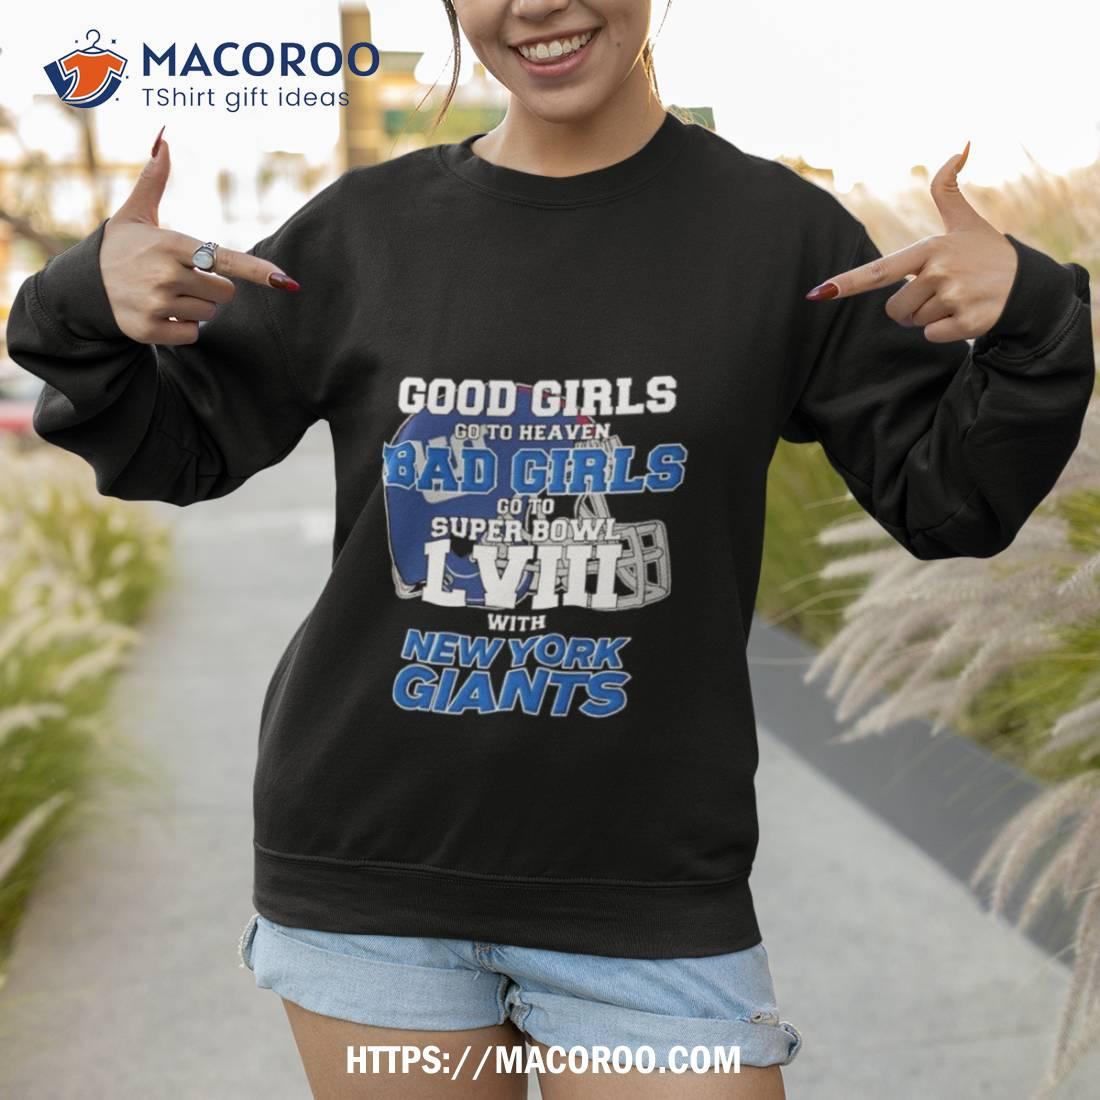 Good Girls Go To Heaven Bad Girls Go To Super Bowl Lviii With New York  Giants